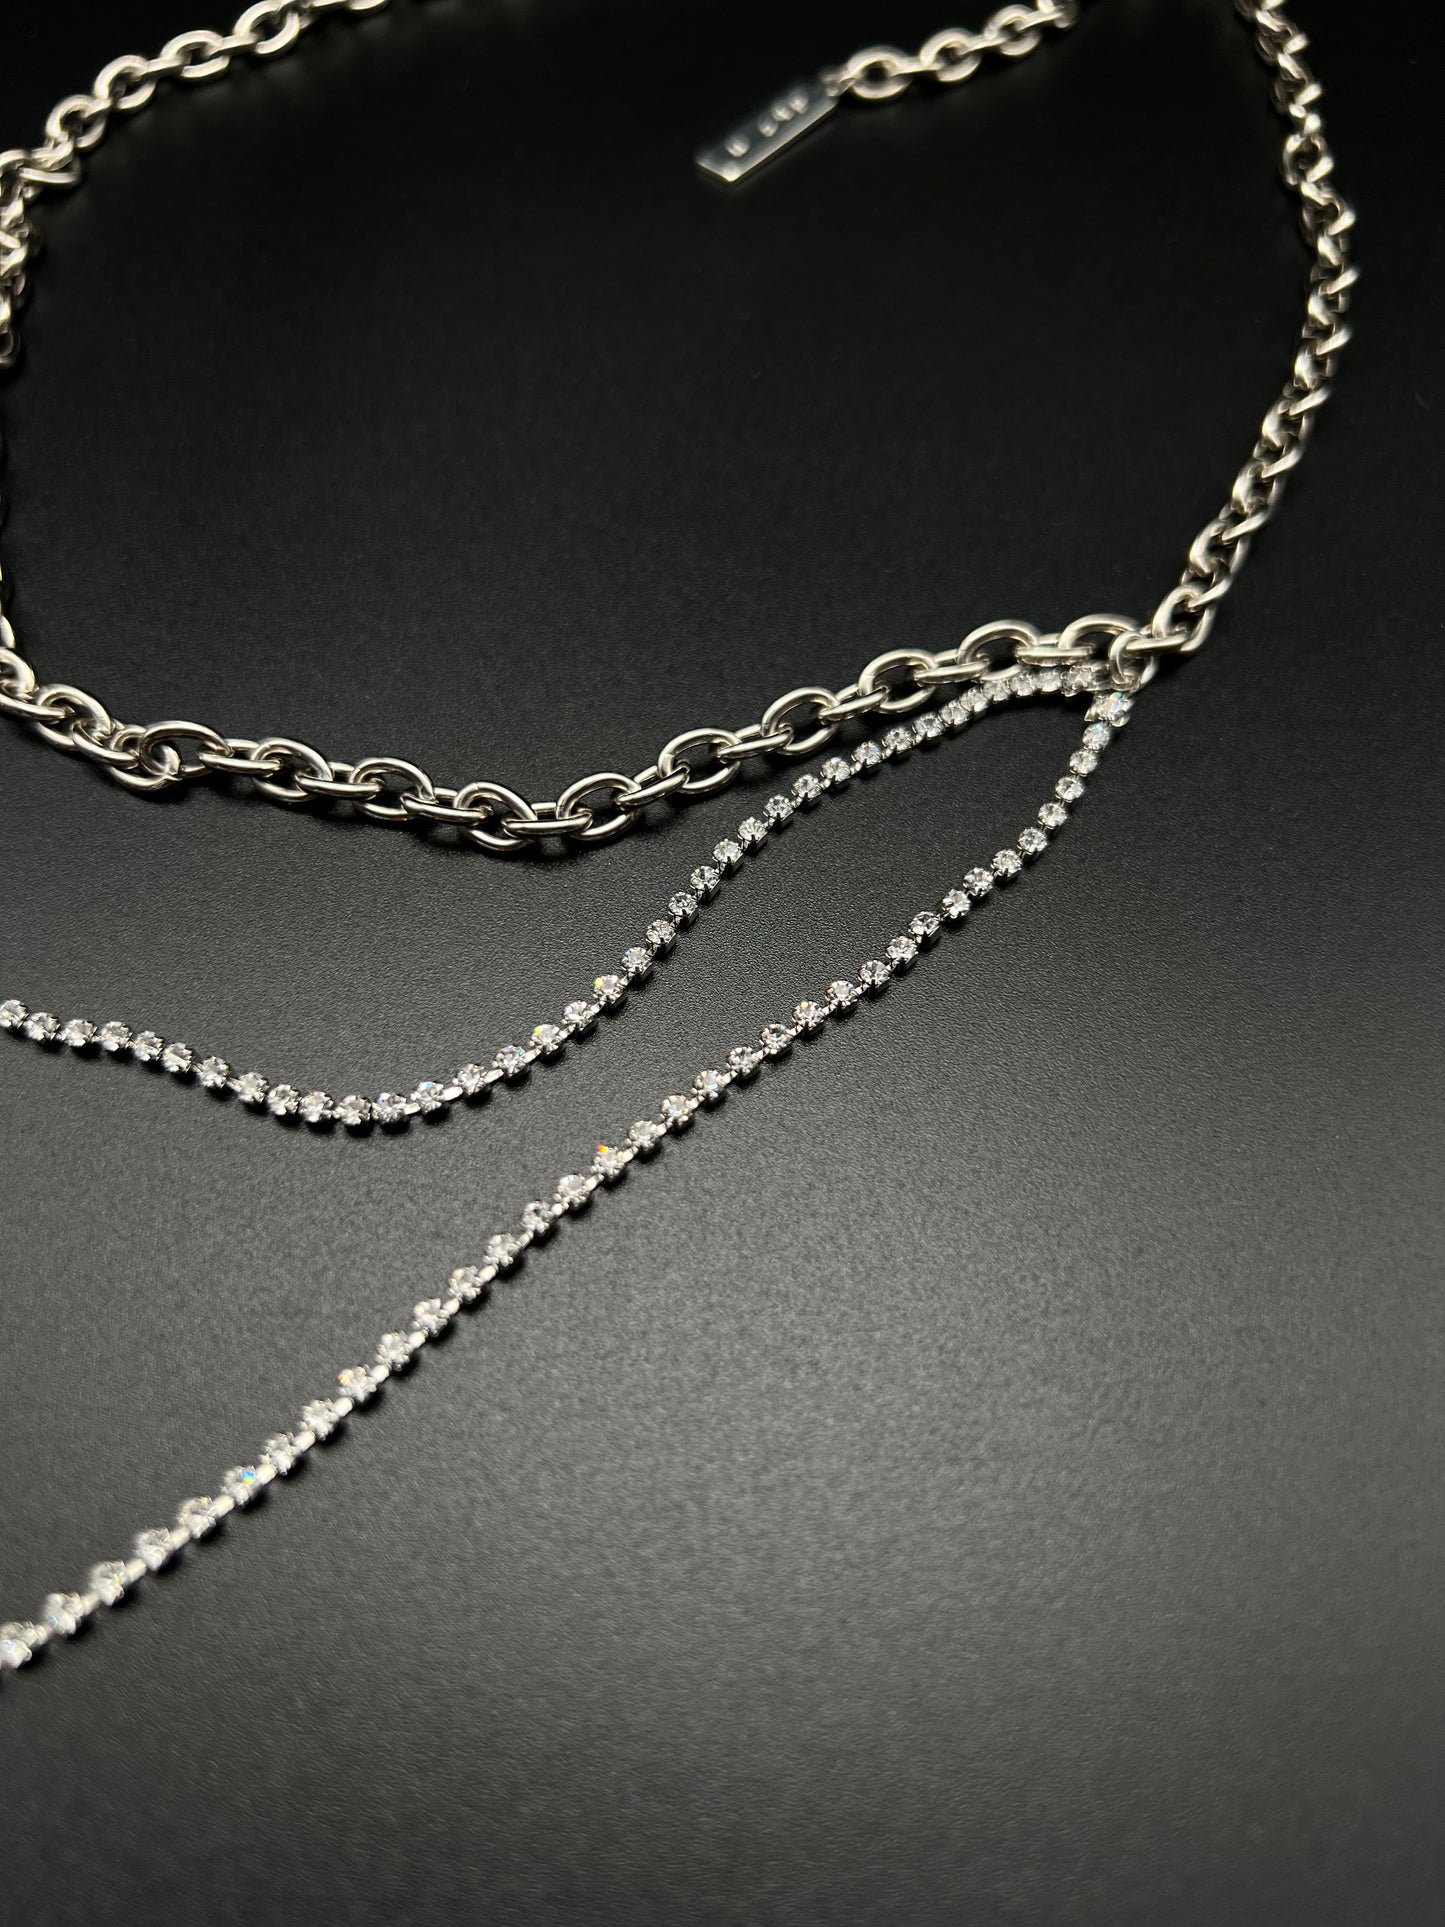 1111Shining necklace - Silver